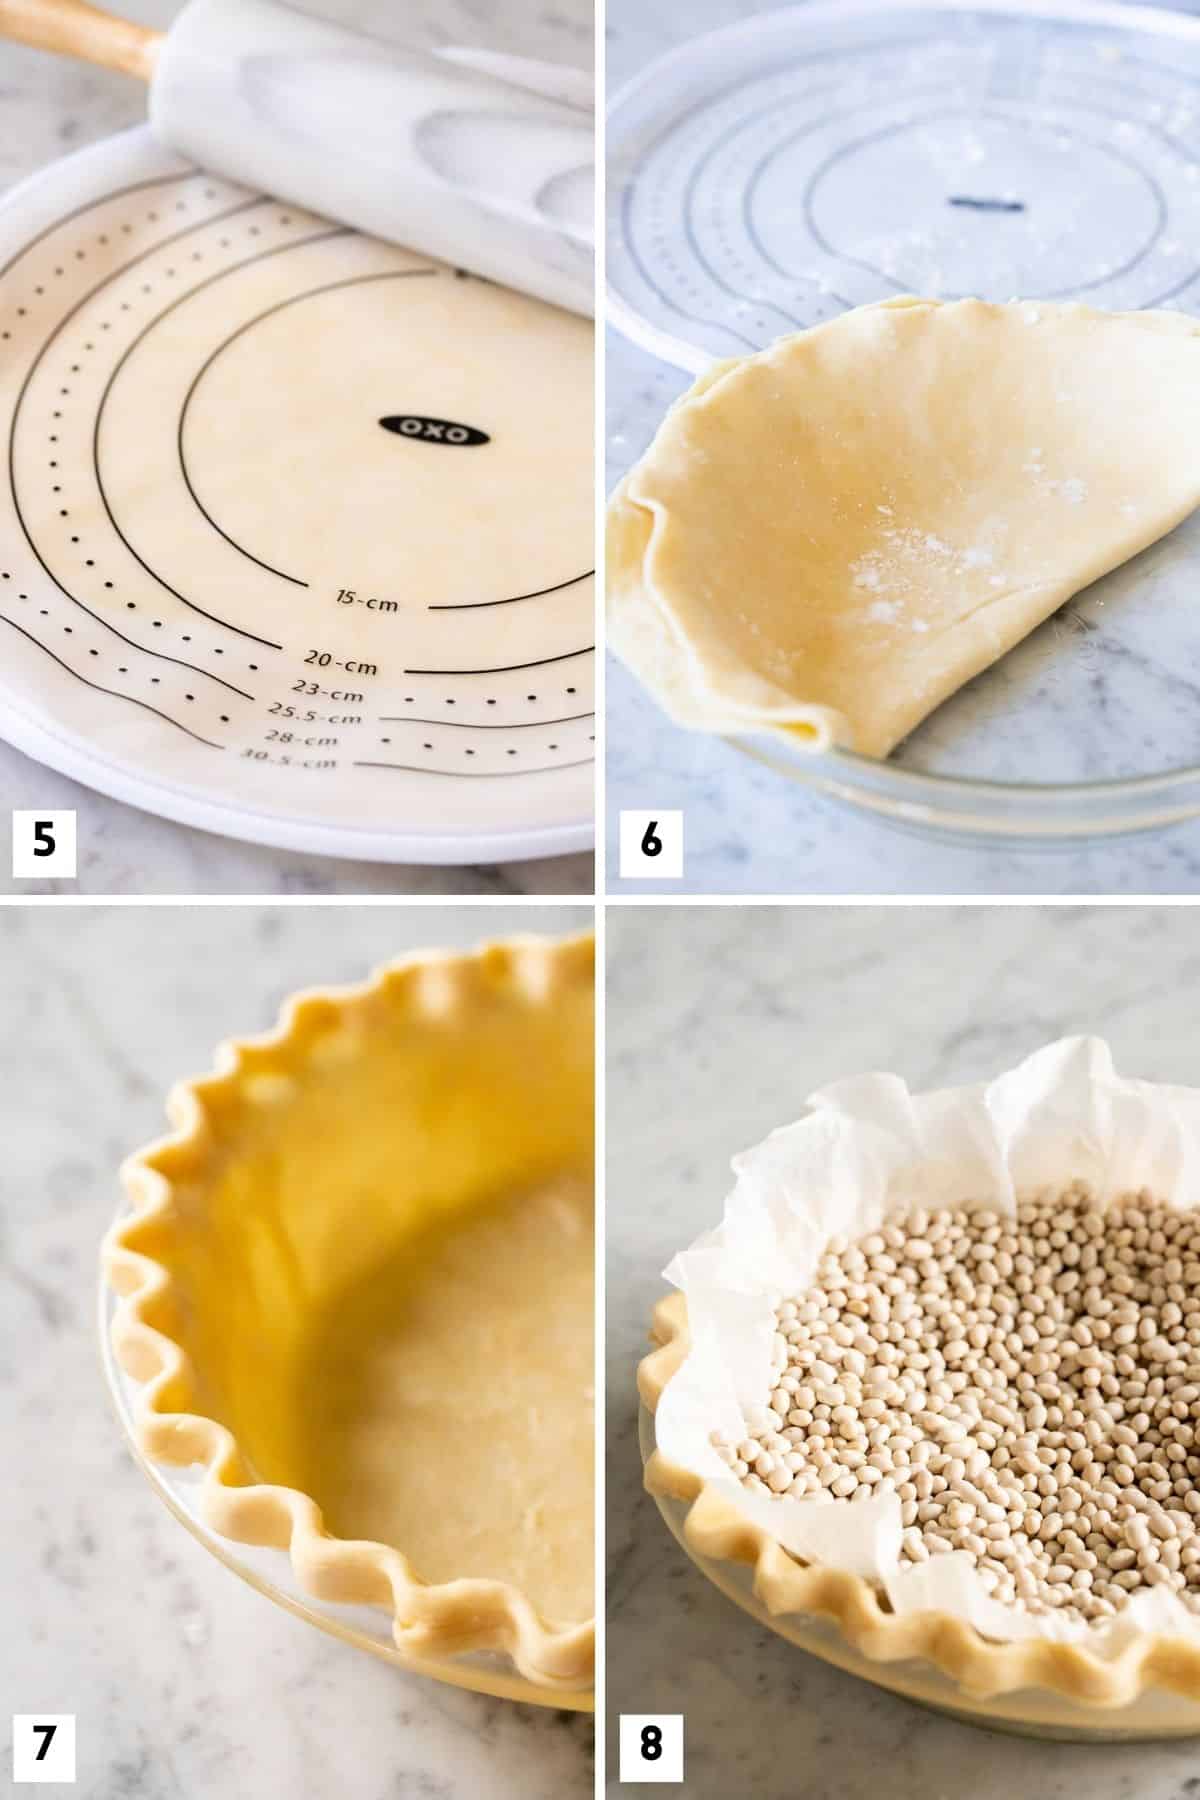 Steps for rolling out and shaping a pie crust.